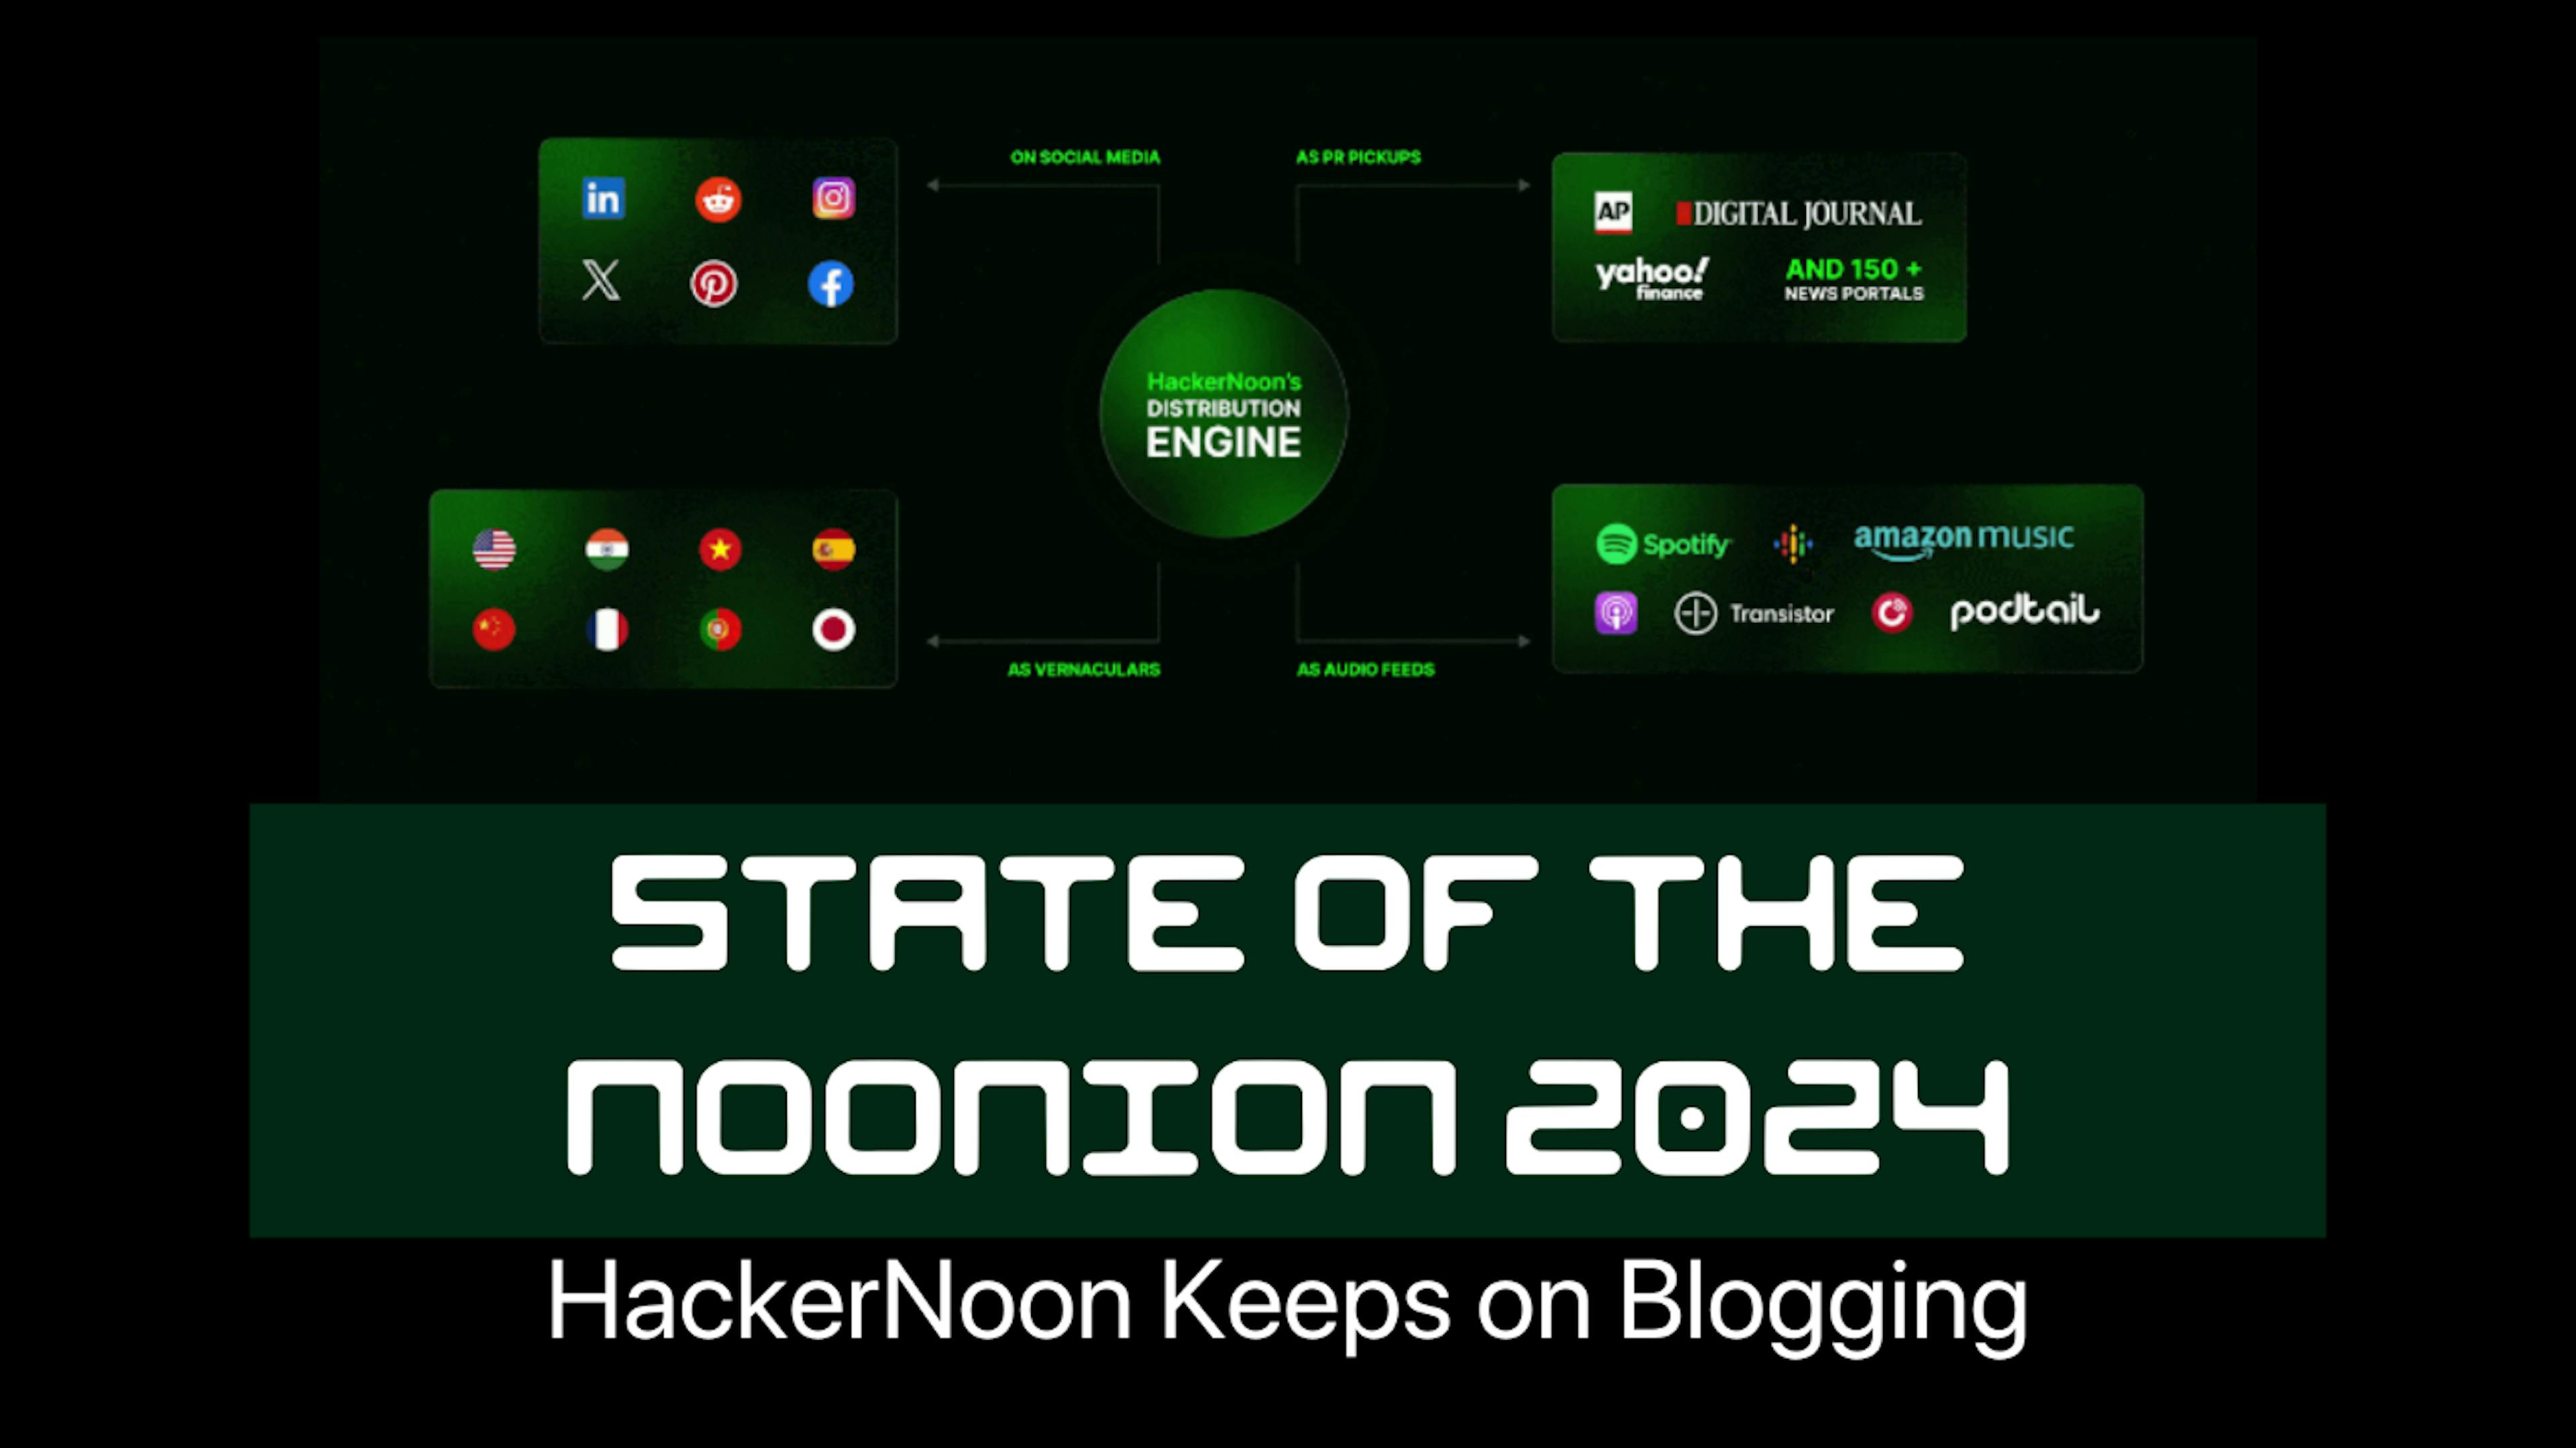 featured image - State of the Noonion 2024: HackerNoon continua blogando